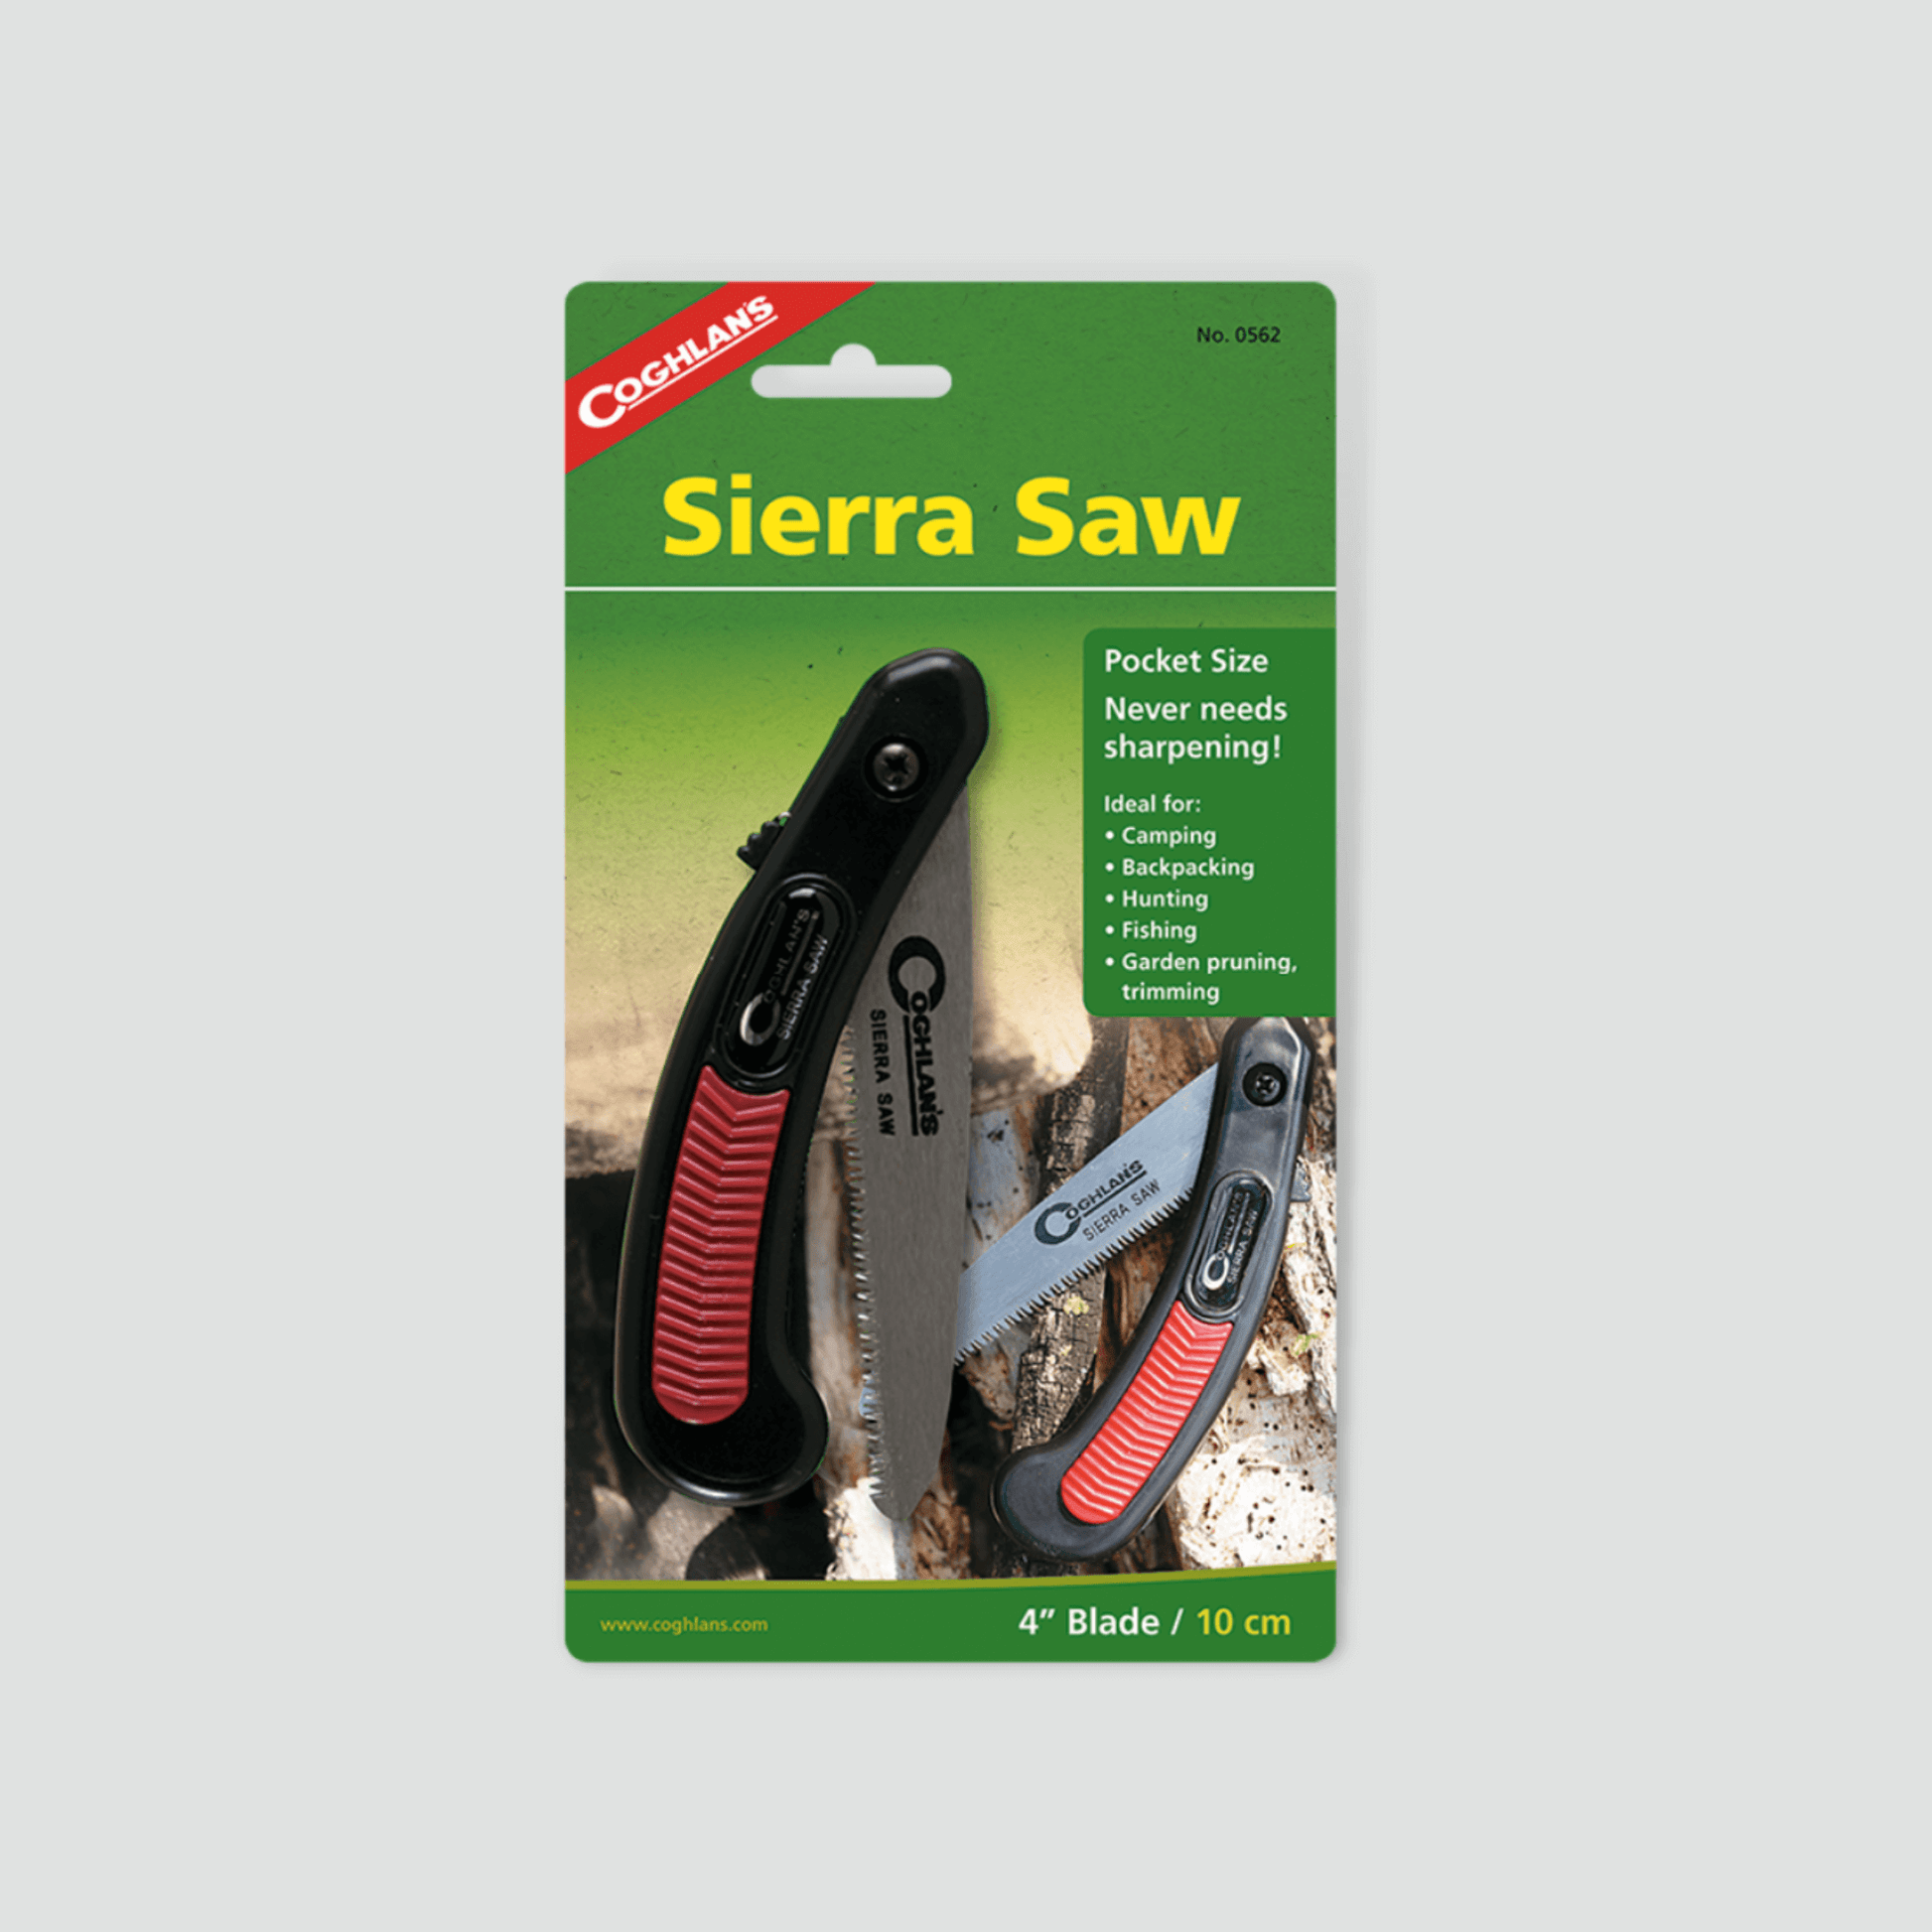 Folding pocket Sierra saw for outdoor use.